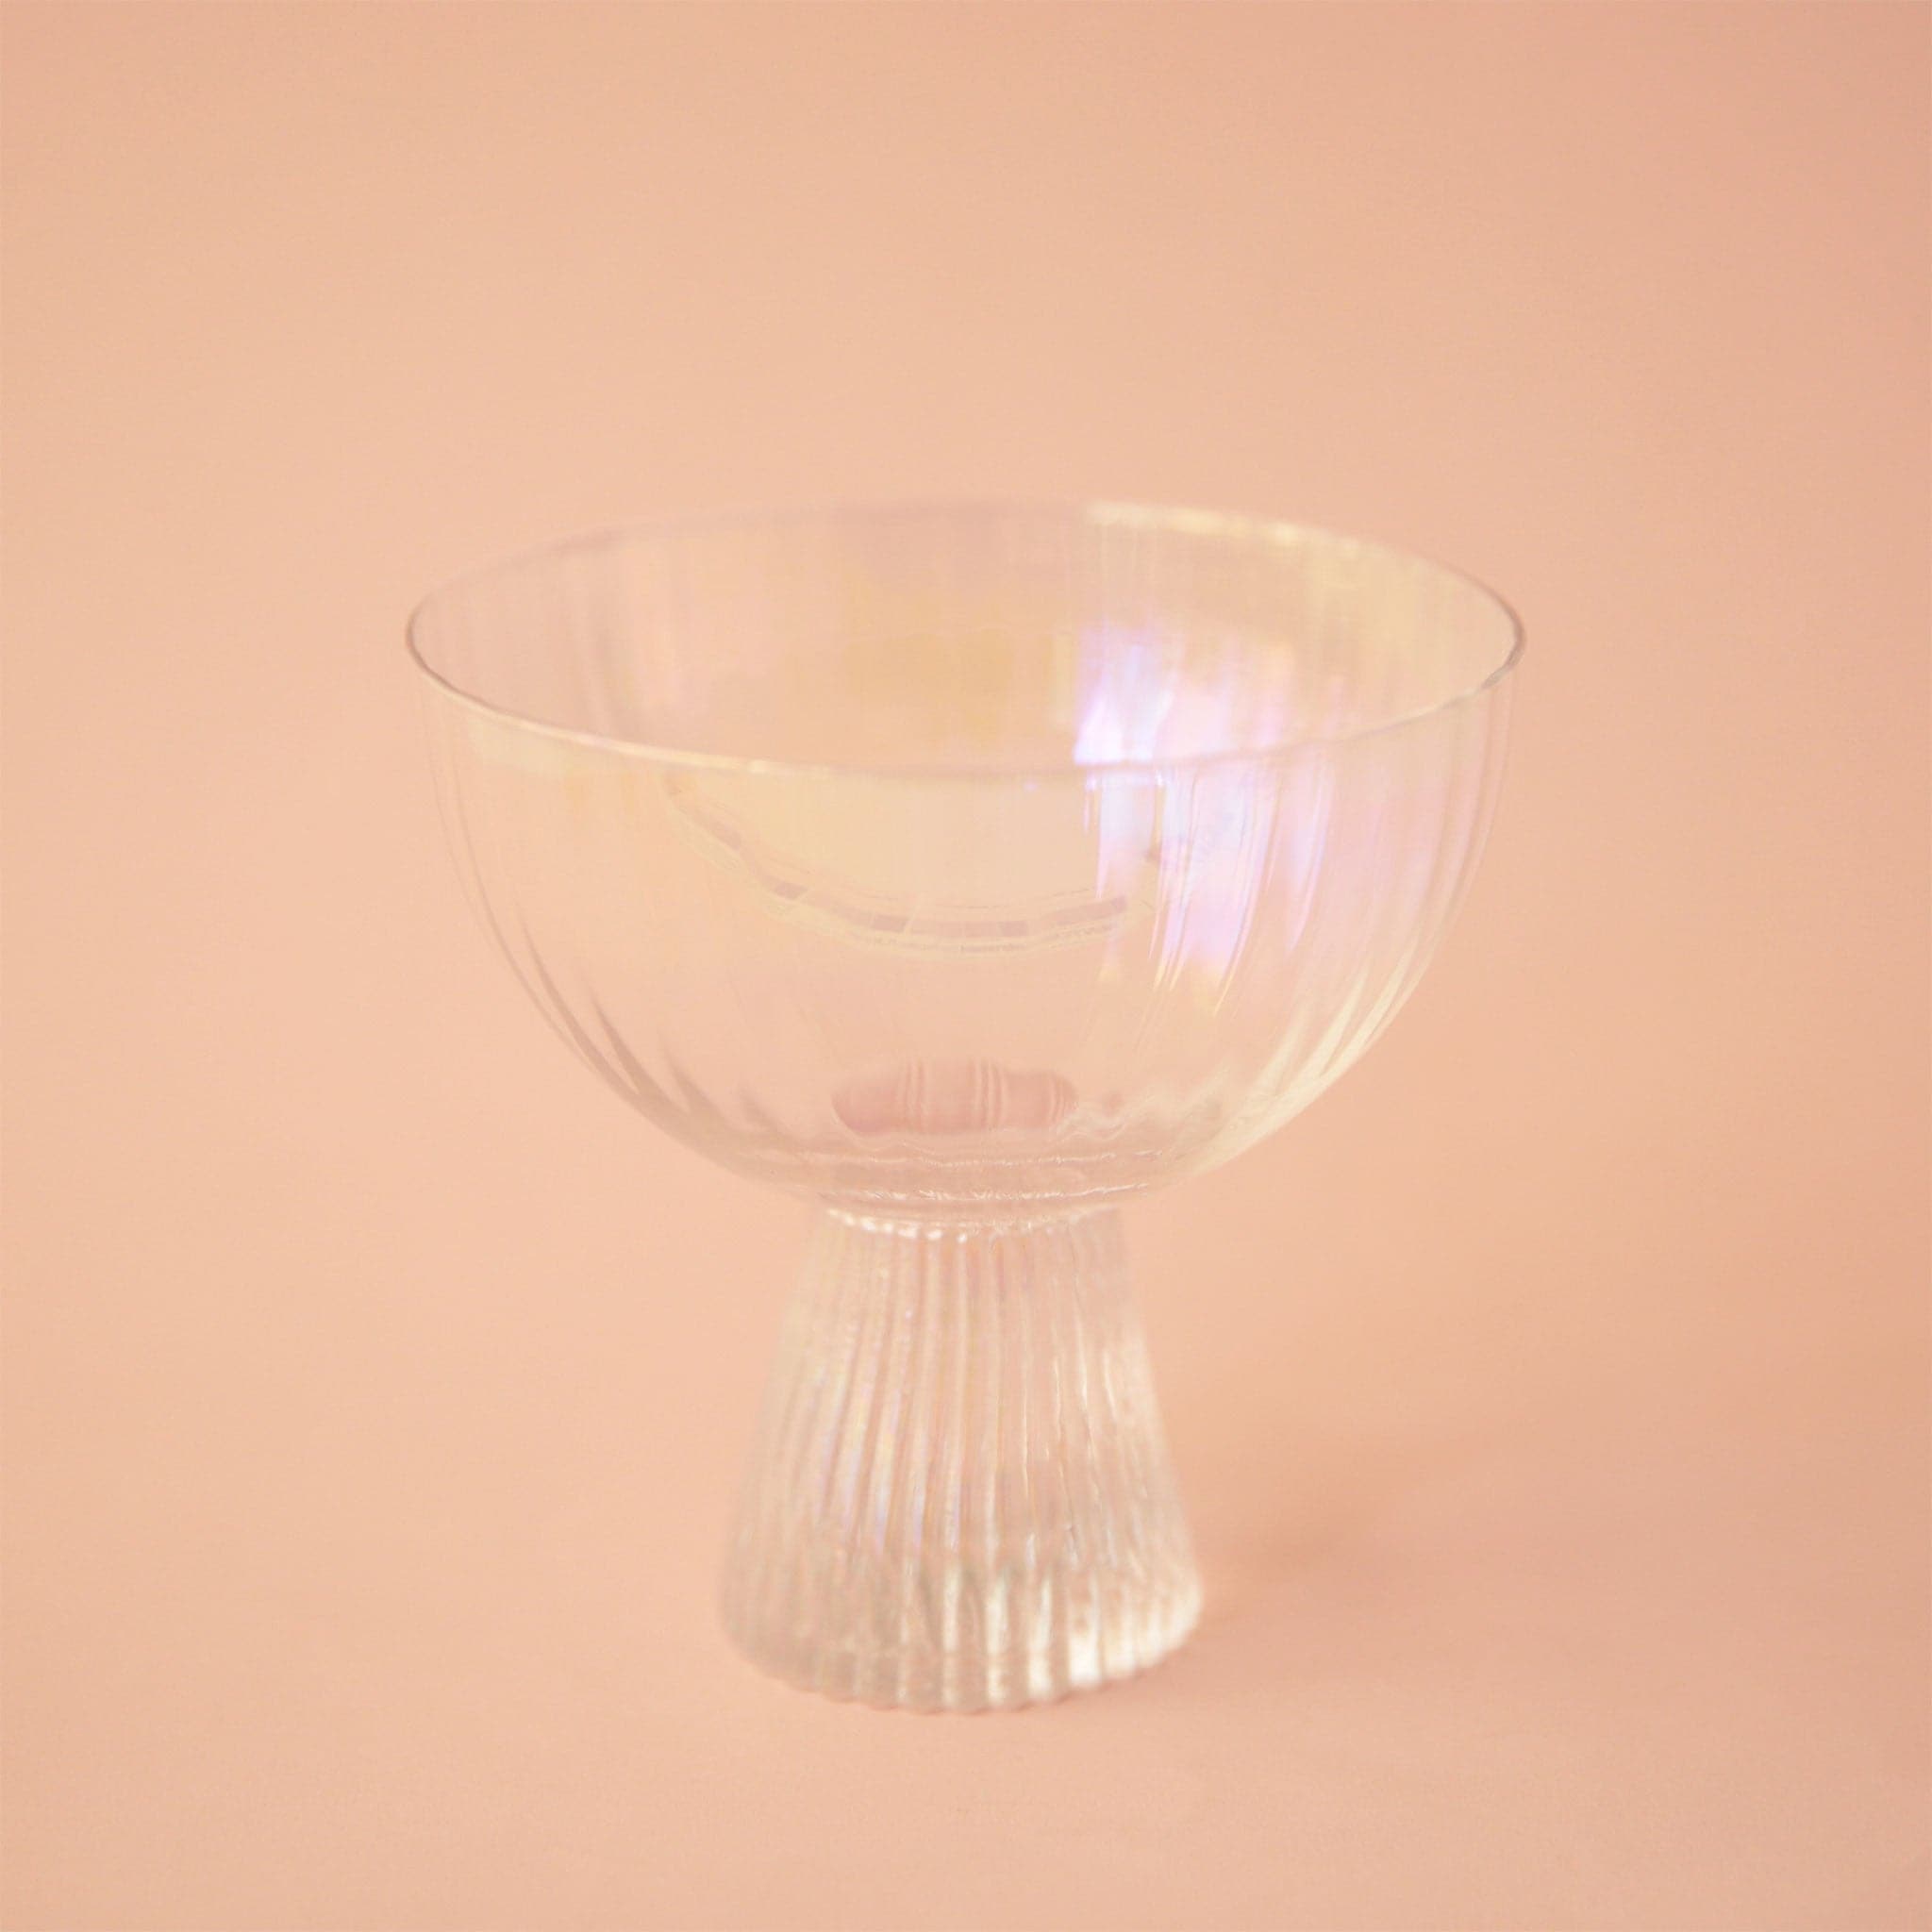 An iridescent coup glass with a ribbed base.